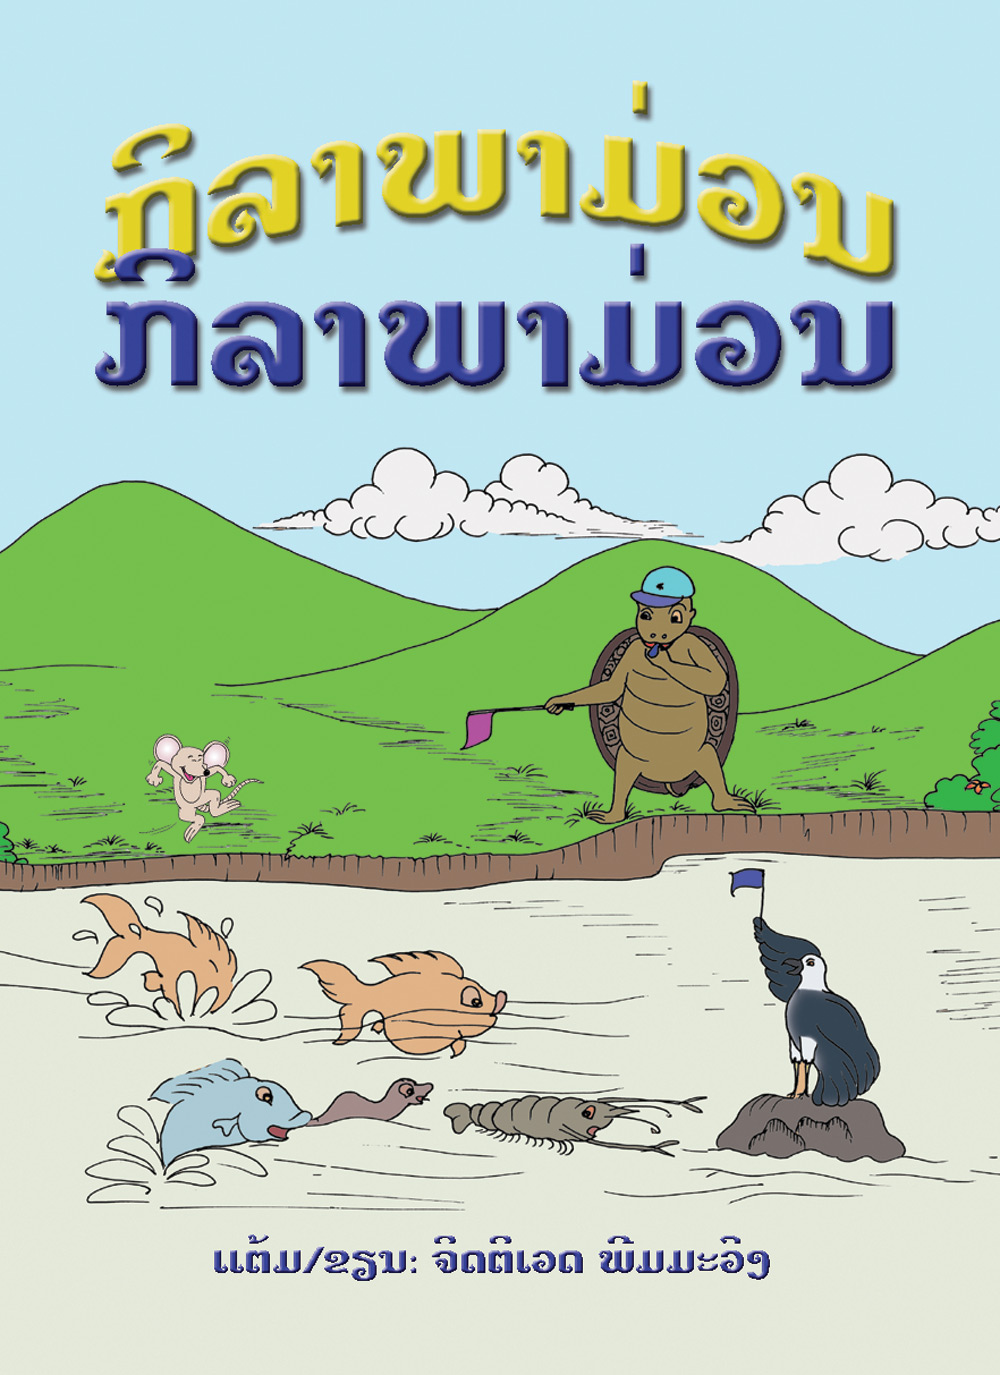 Sports making fun (Fun with sports) large book cover, published in Lao language